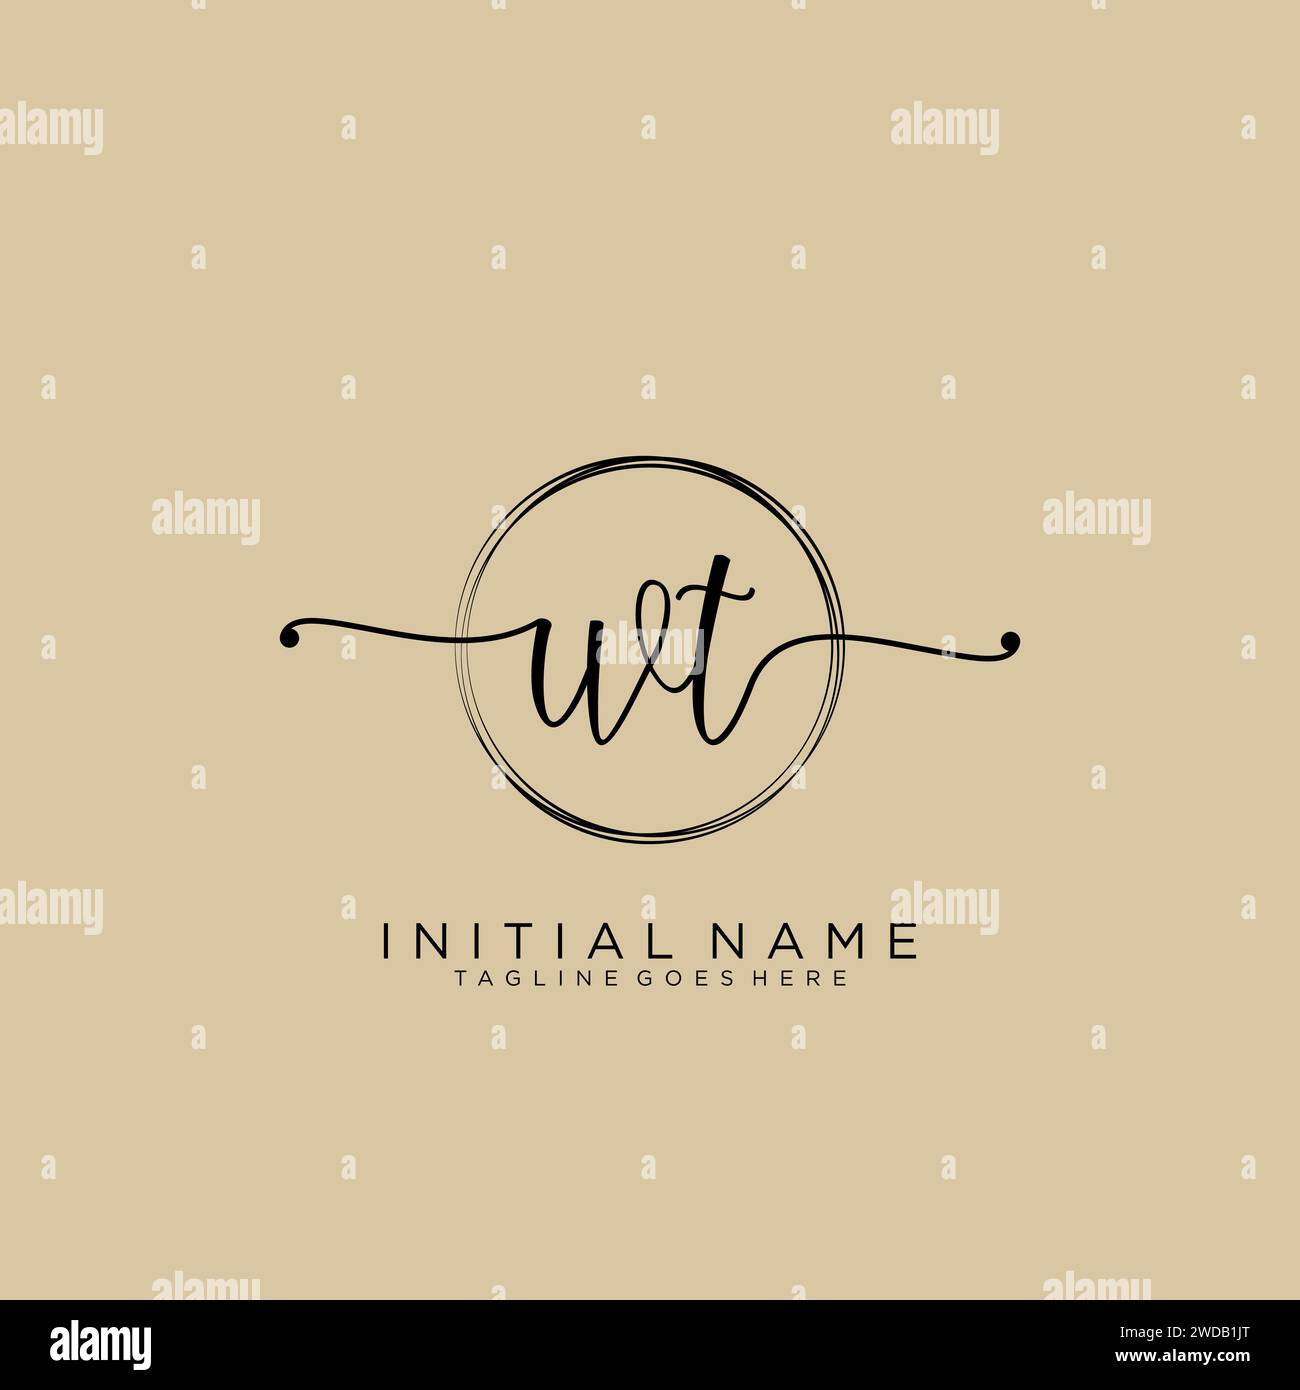 WT Initial handwriting logo with circle Stock Vector